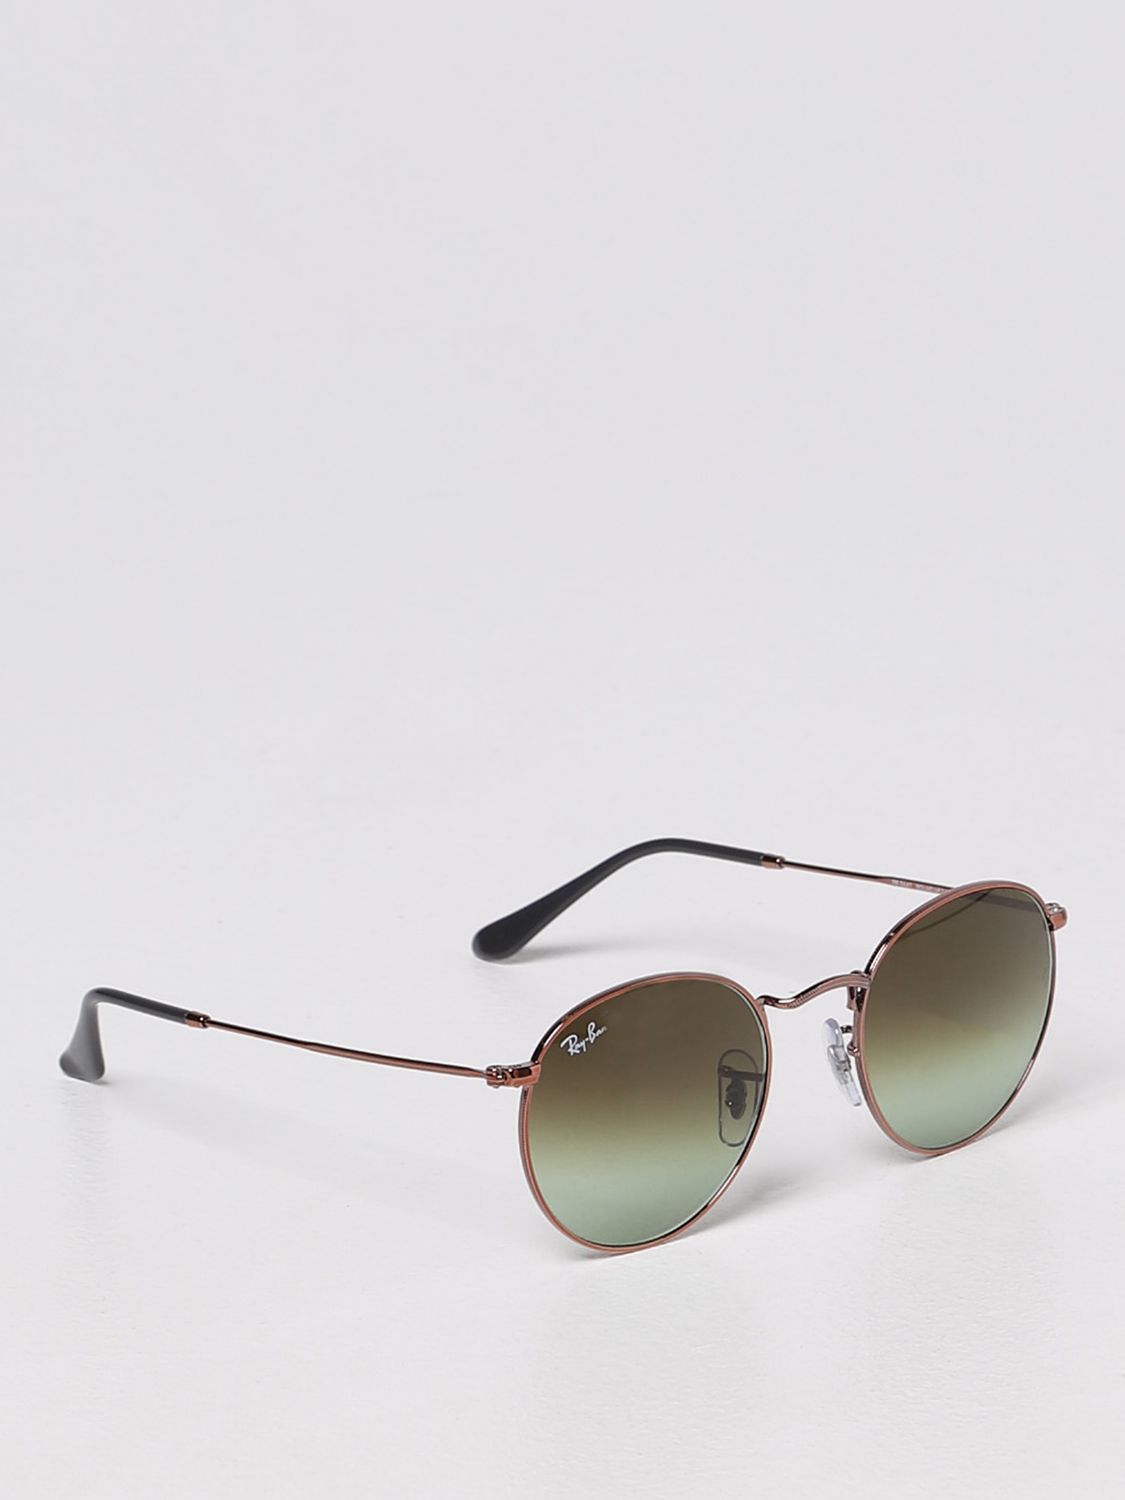 Lunettes Ray-Ban: Lunettes femme Ray-ban olive 1